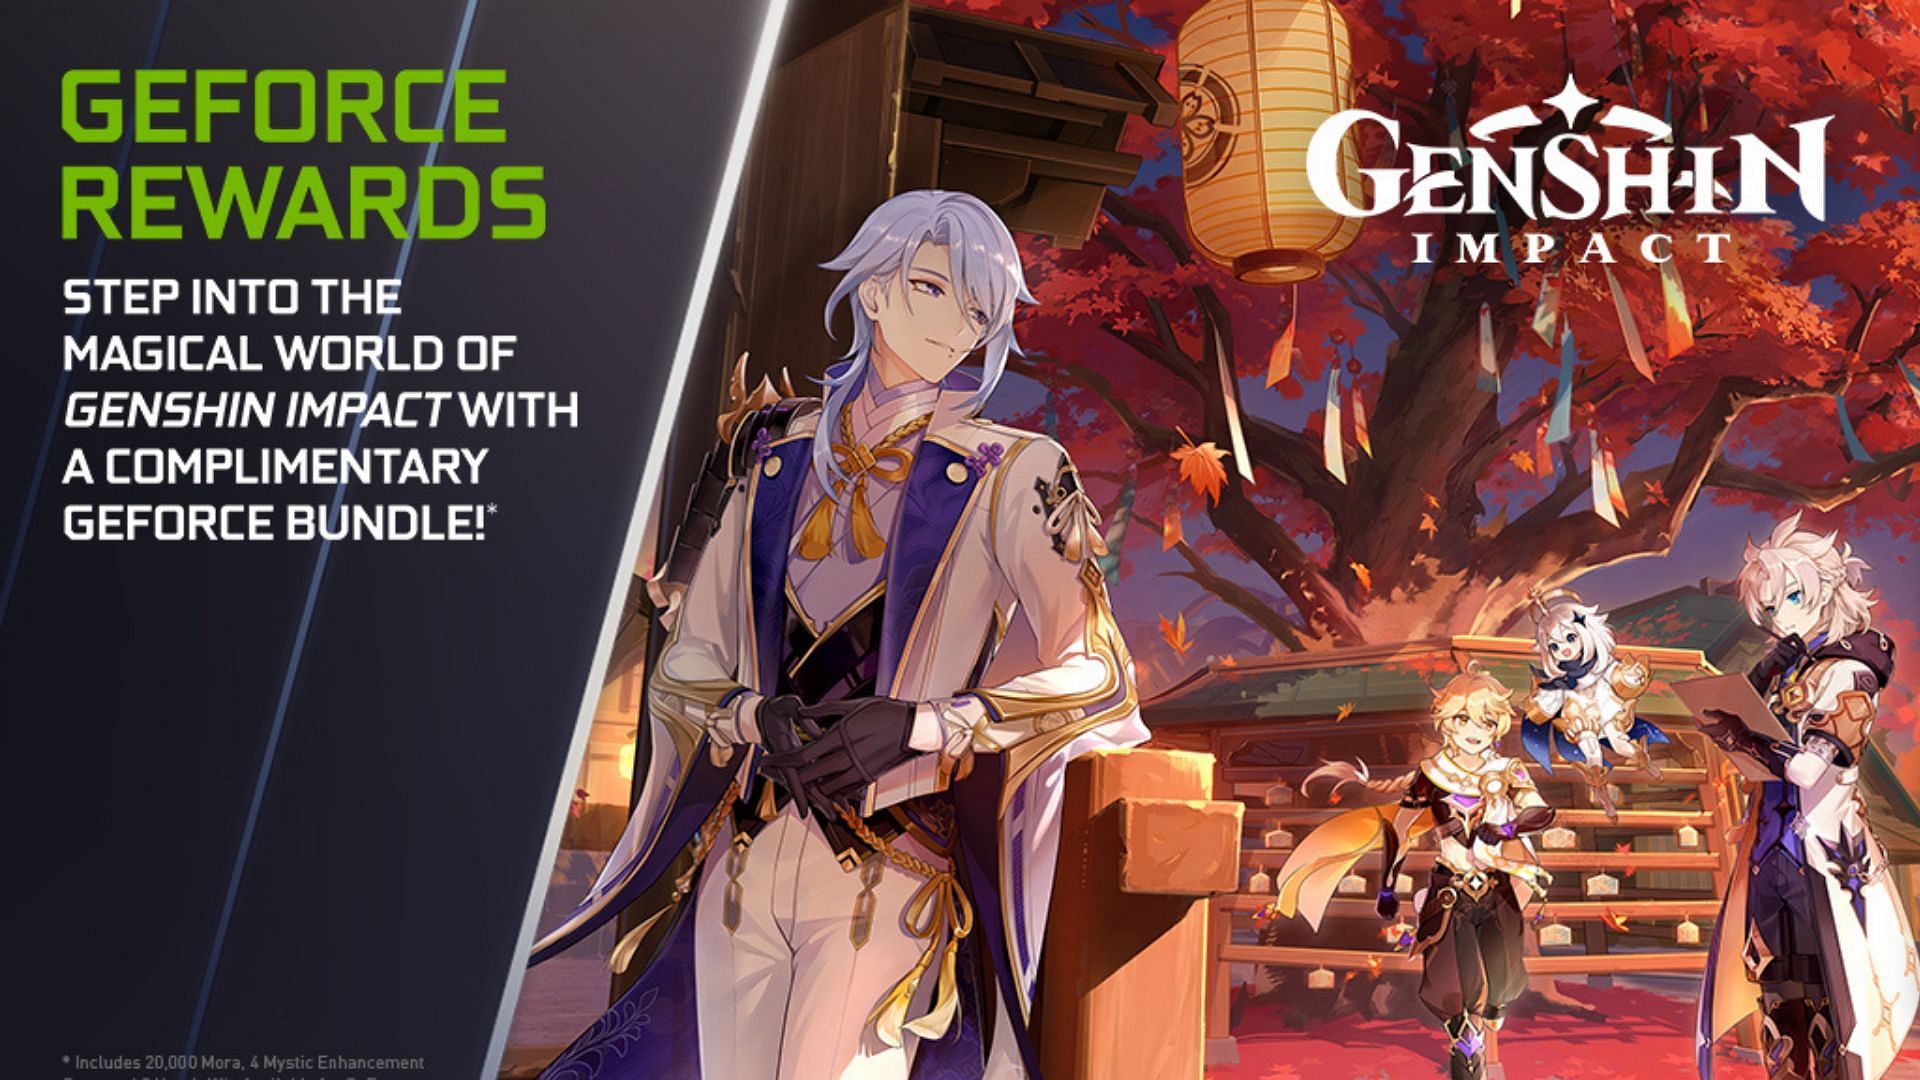 How to Redeem Codes in Genshin Impact - Geekflare